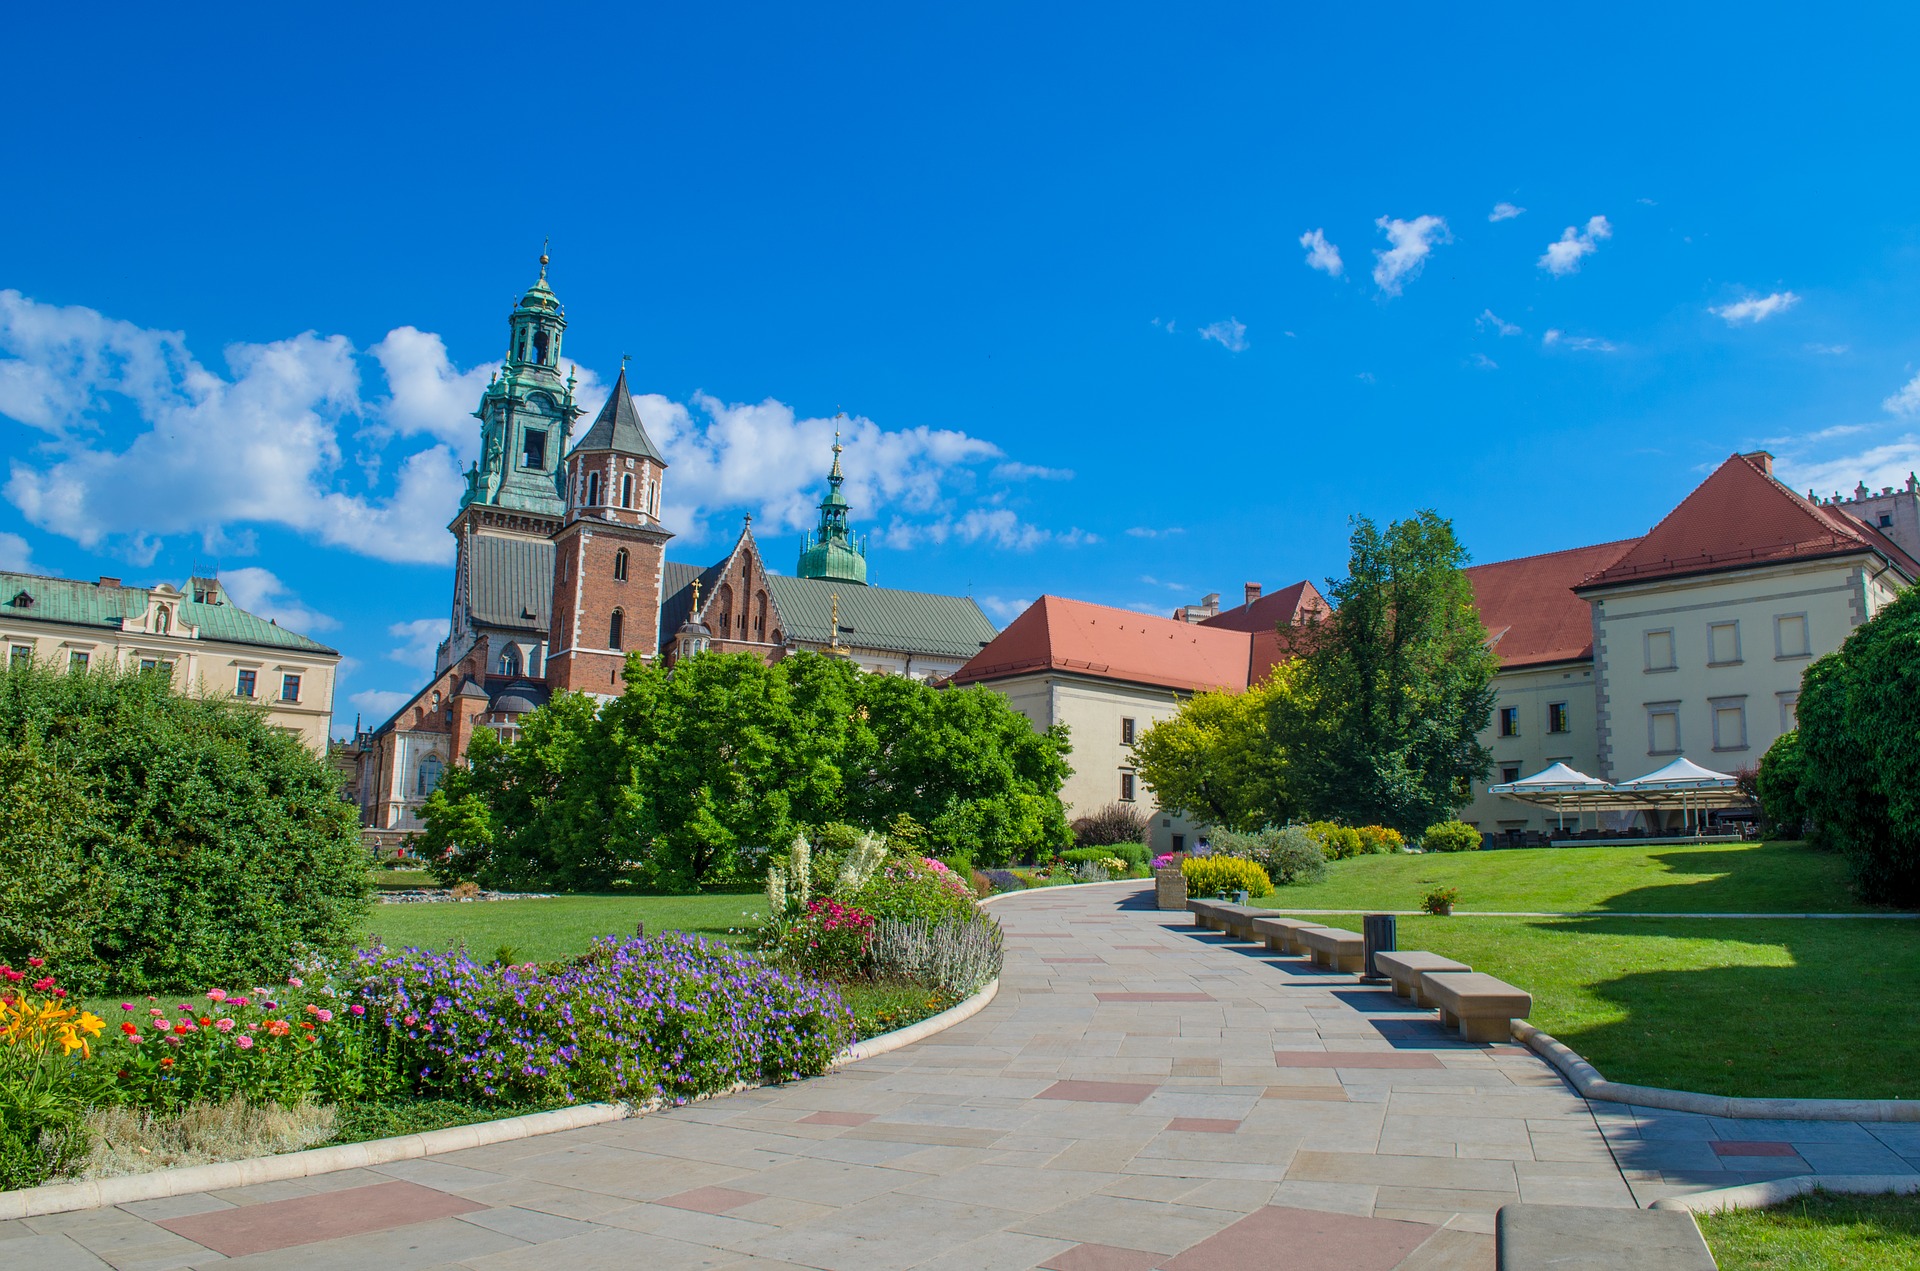 Krakow Travel Guide - 3 Most Compelling Reasons to Visit This City